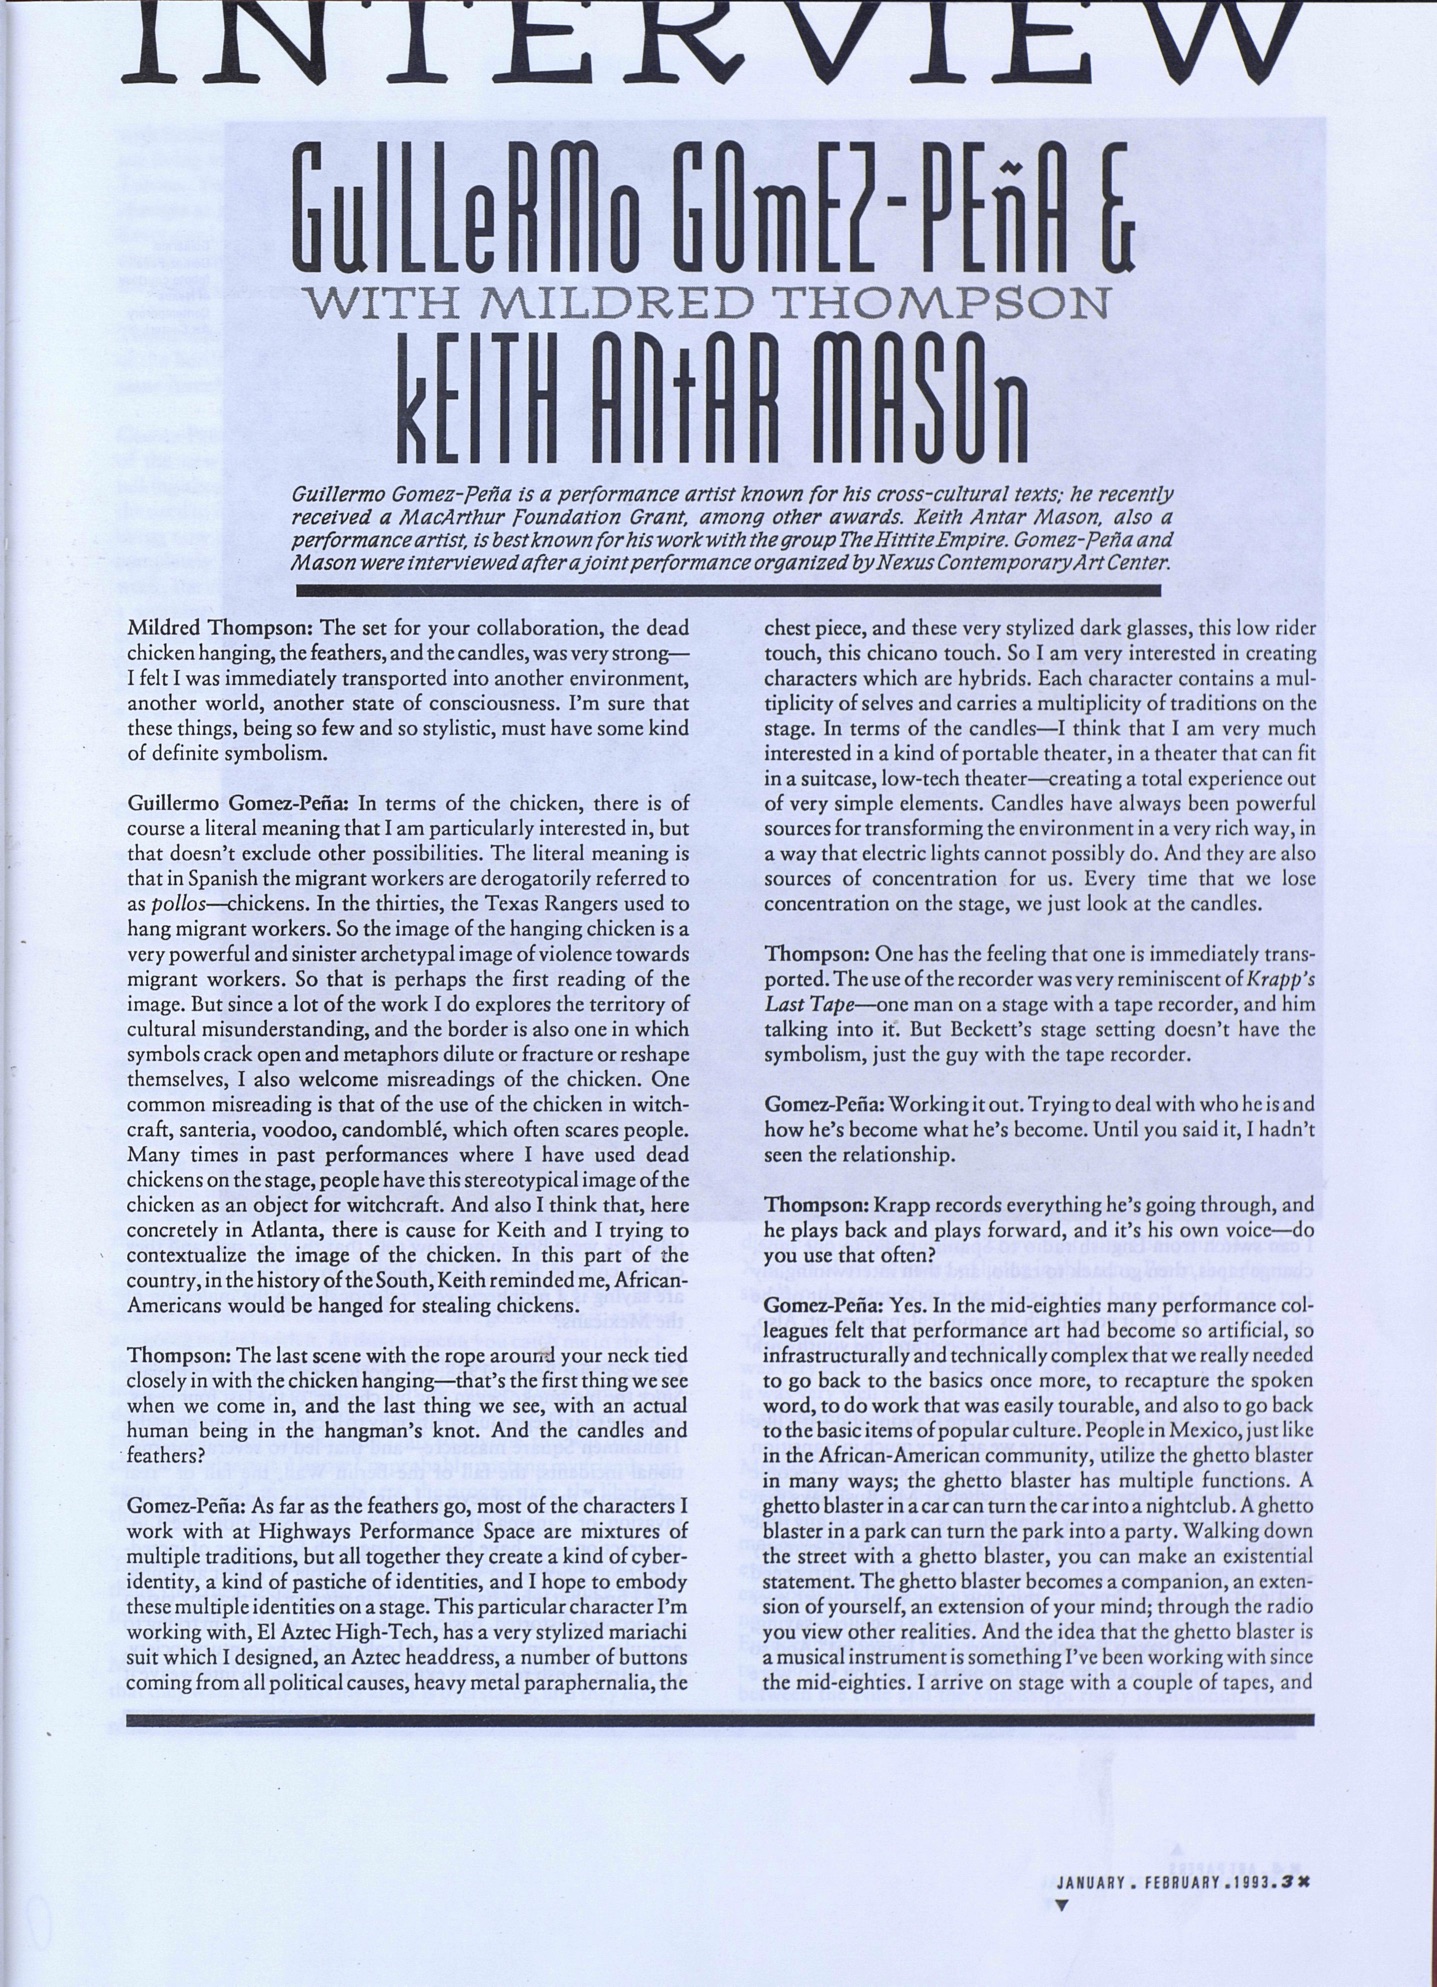 scan of interview between Guillermo Gomez-Peña, Keith Antar Mason, and Mildred Thompson